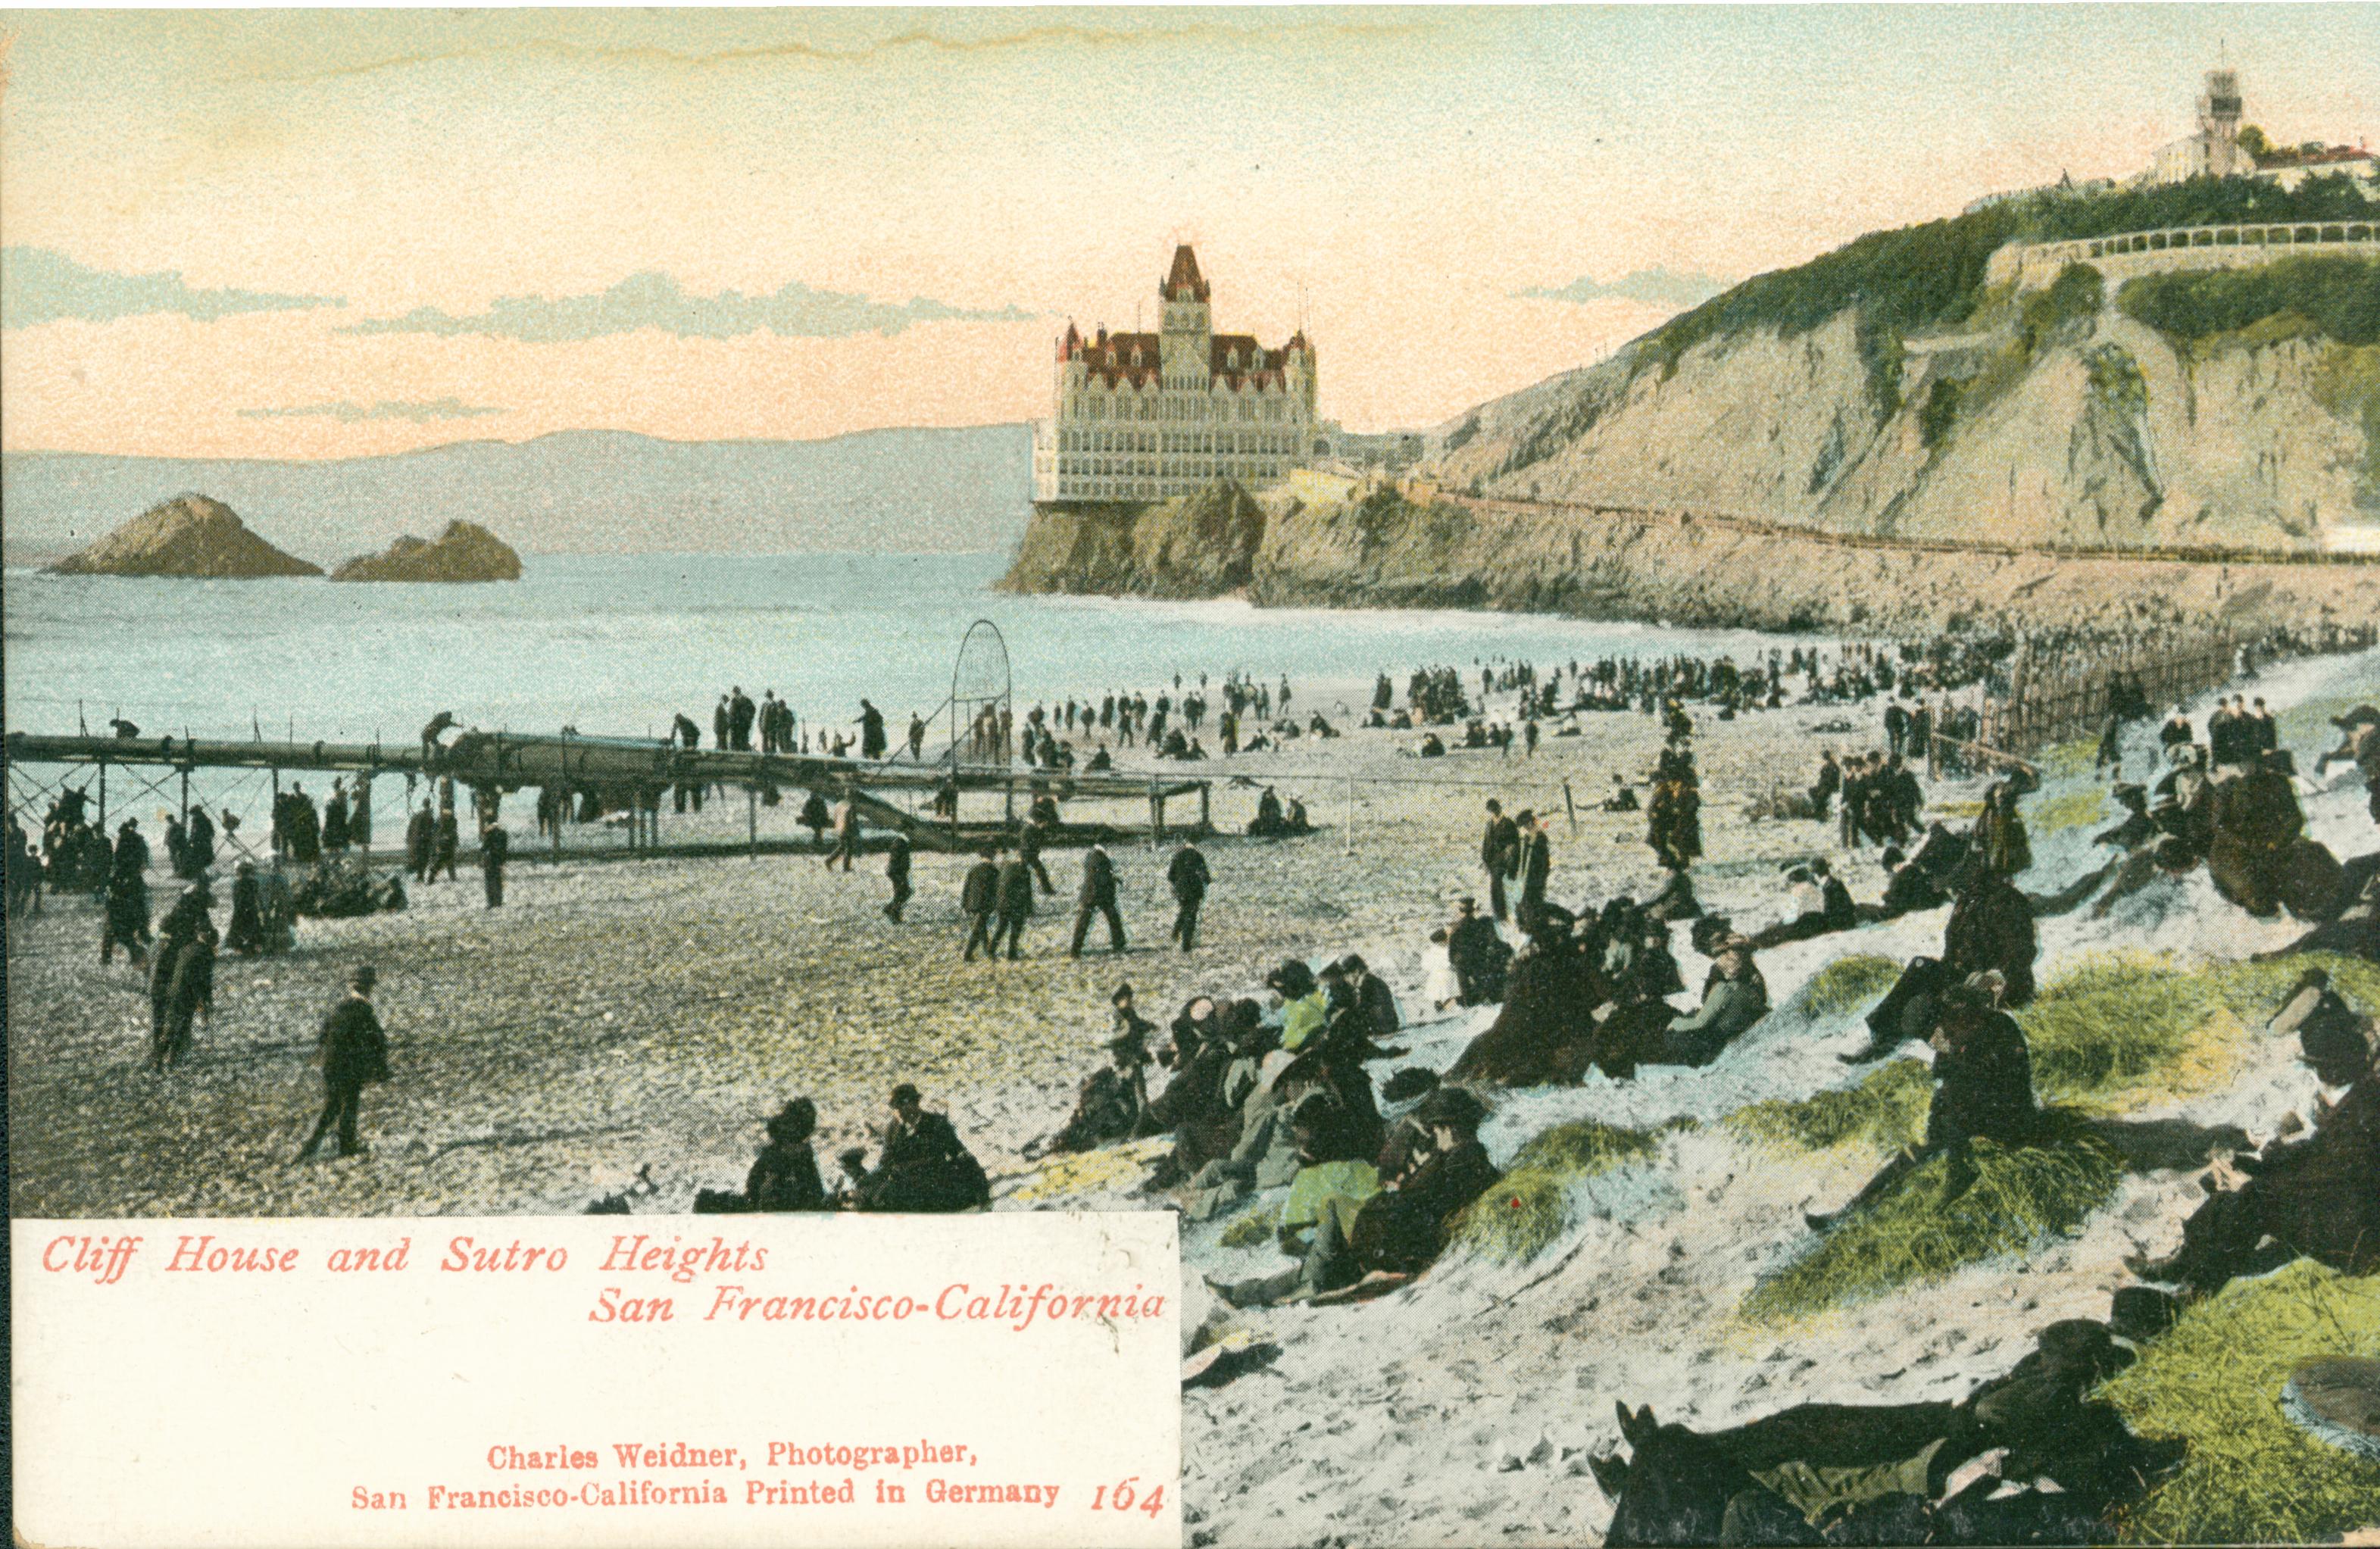 Shows the Cliff House, Seal Rocks and Sutro Heights, with individuals on the beach in the foreground.